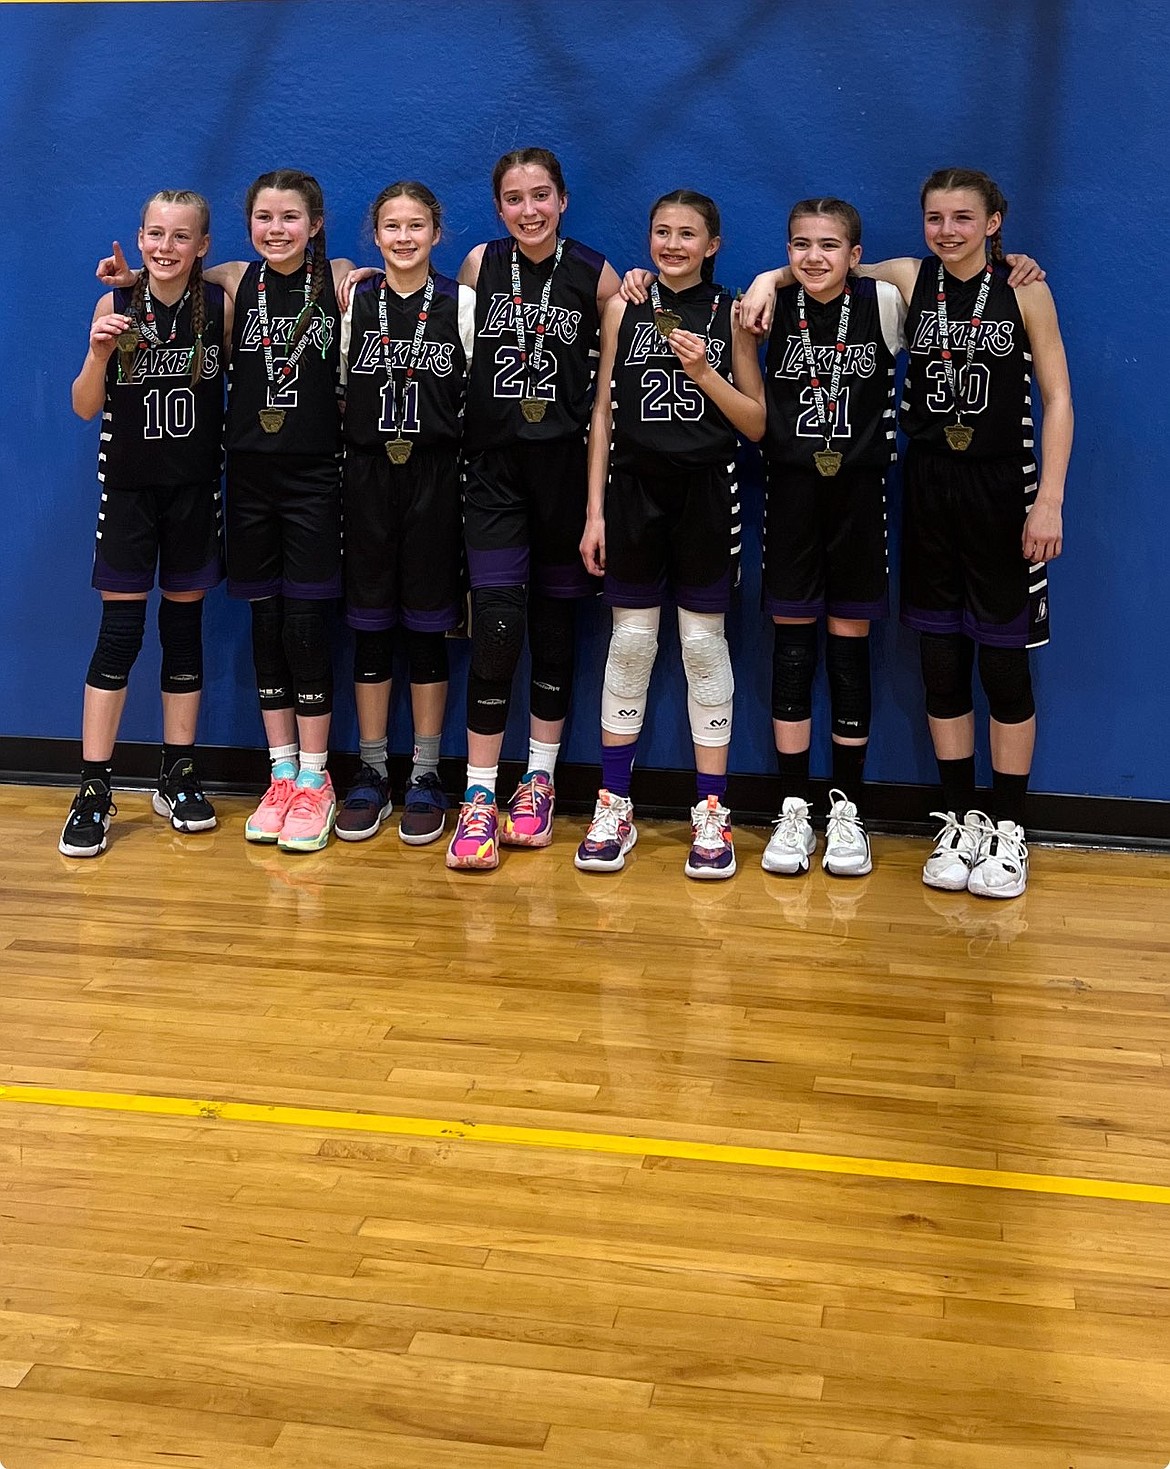 Courtesy photo
The Cd'A Lakers AAU girls basketball team went undefeated to win the fifth-grade bracket at the Spring Fling tournament last weekend in Missoula, Mont. From left are Kinsley Wallis, Peyton Brulotte, Cora Seagreaves, Kyal Carlson, Teagan Phenice, Emory Talbot and Addi Salas.